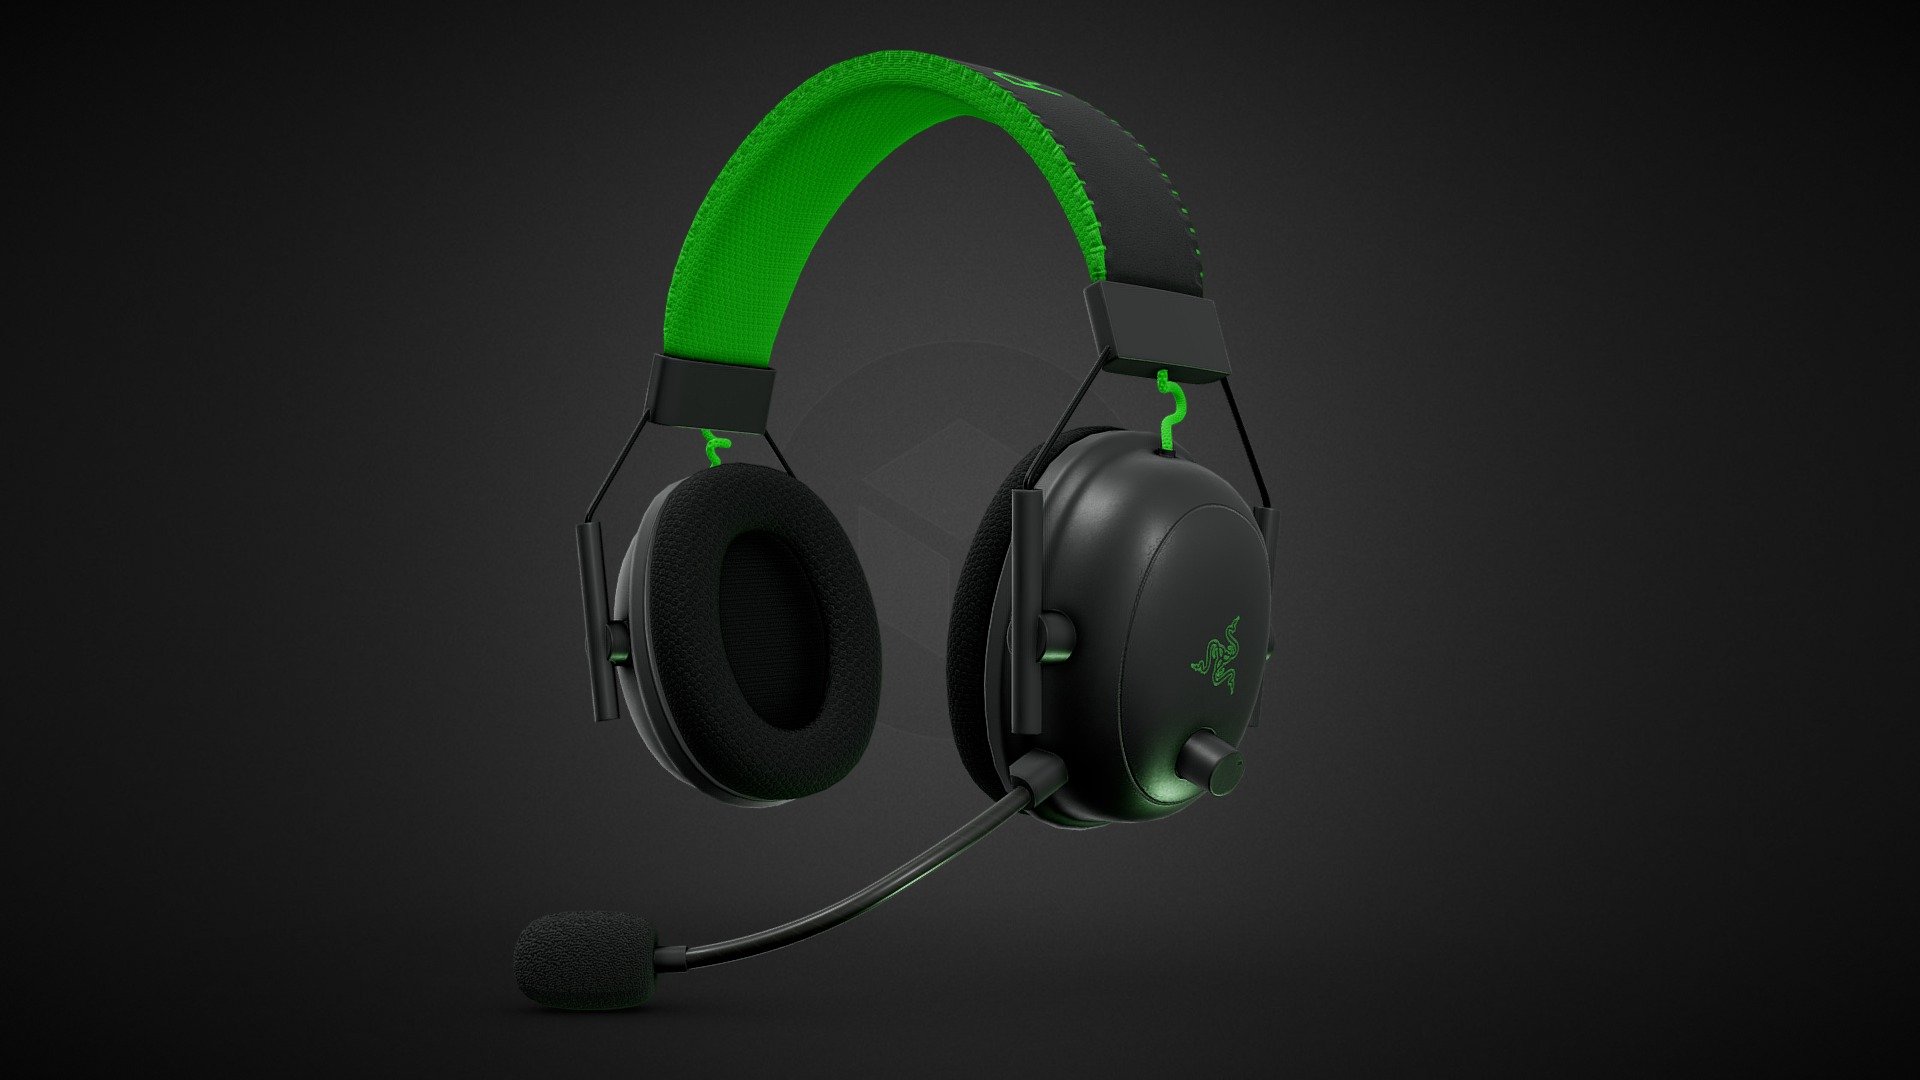 Headset modeled using subdivision modifier in Blender,  it was pretty fun and satisfying 3d model